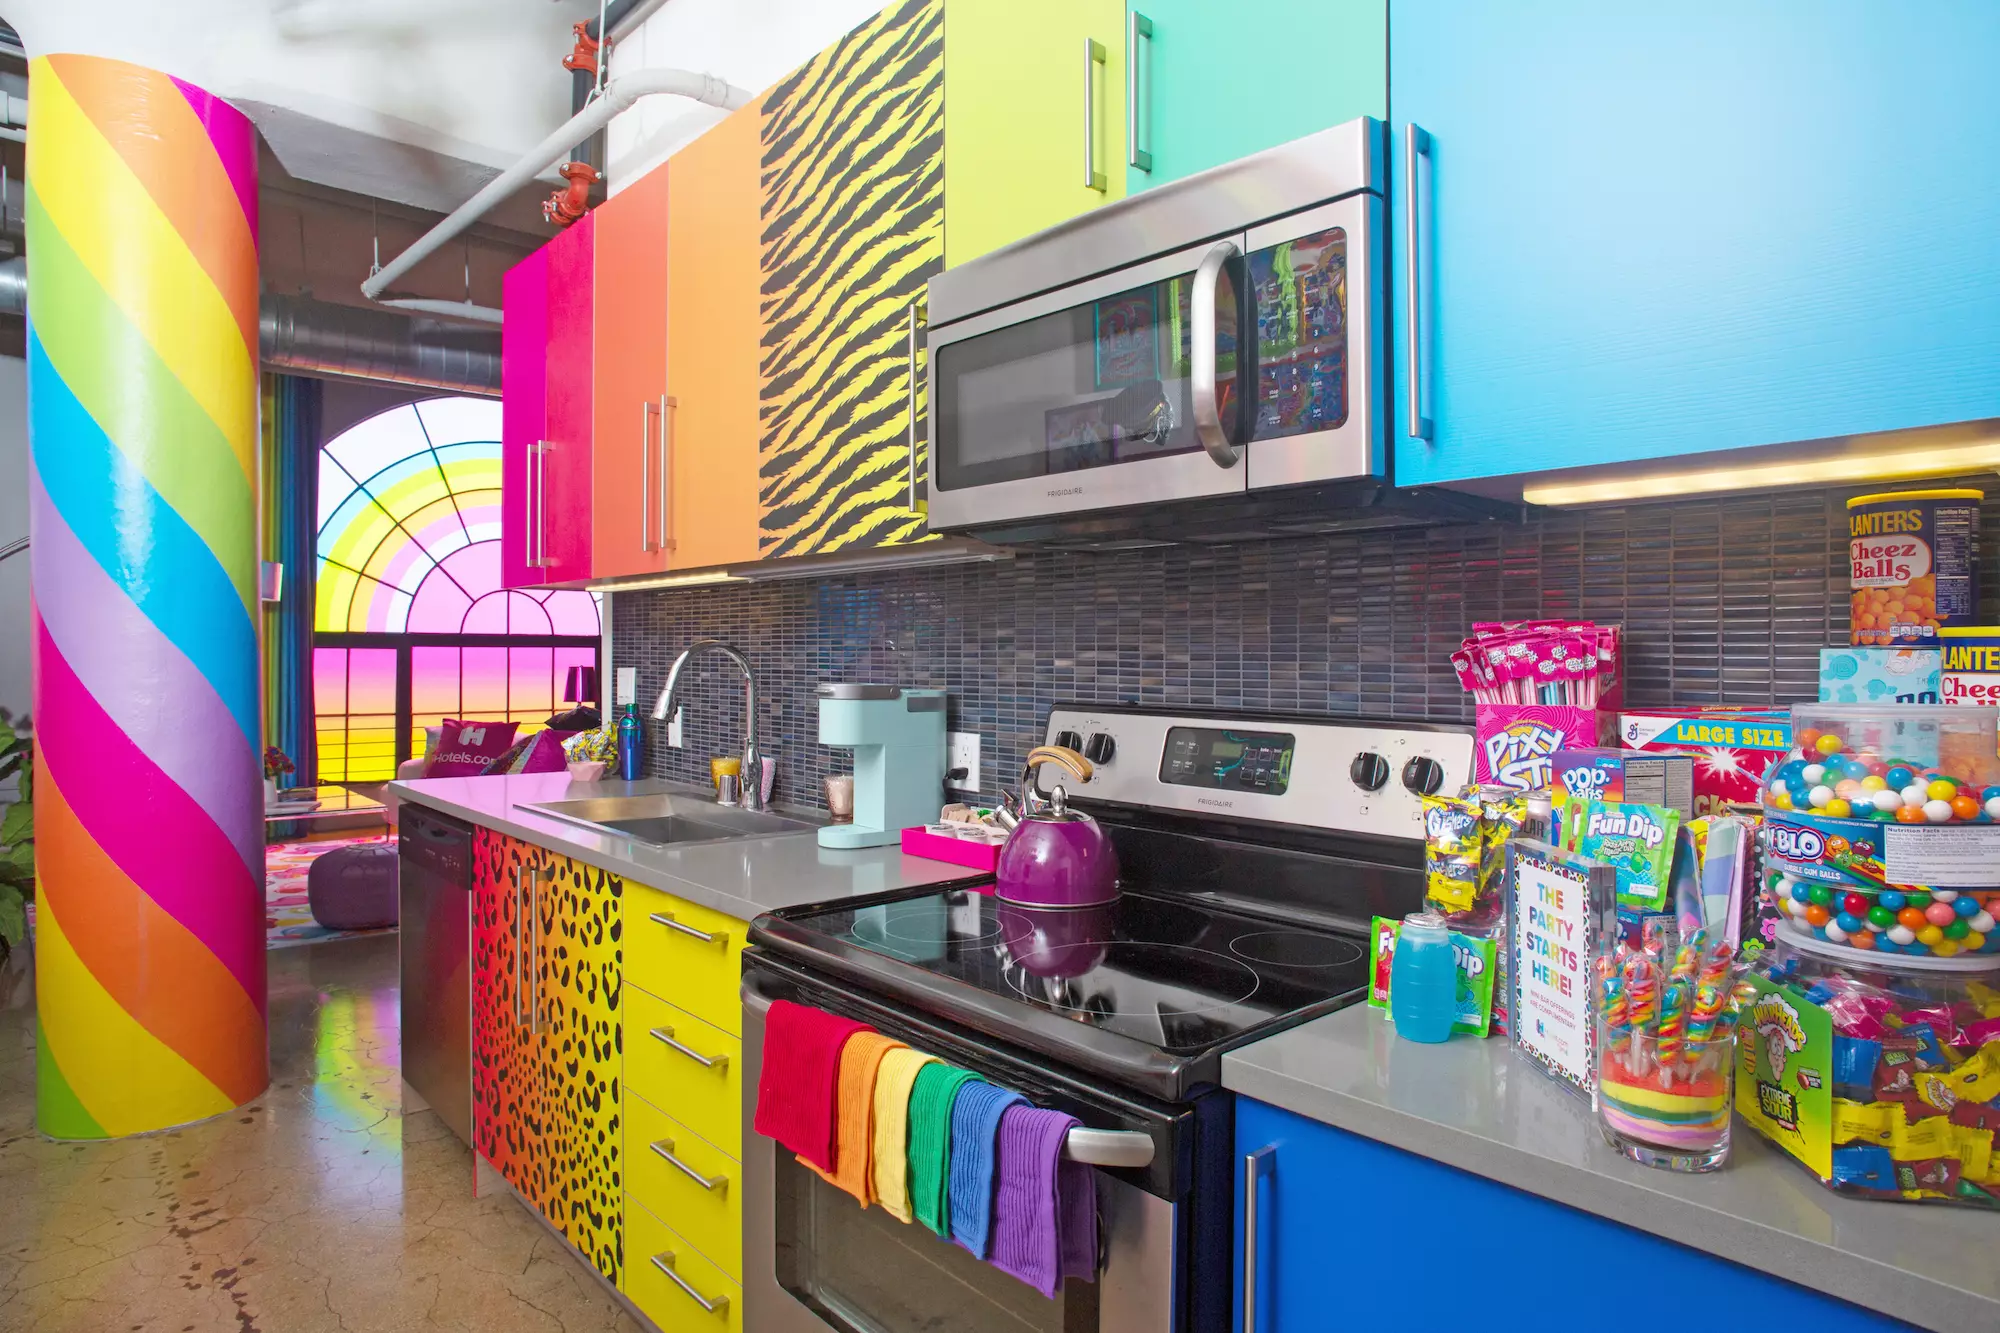 The apartment will keep you feeling lively with its brightly coloured decoration.